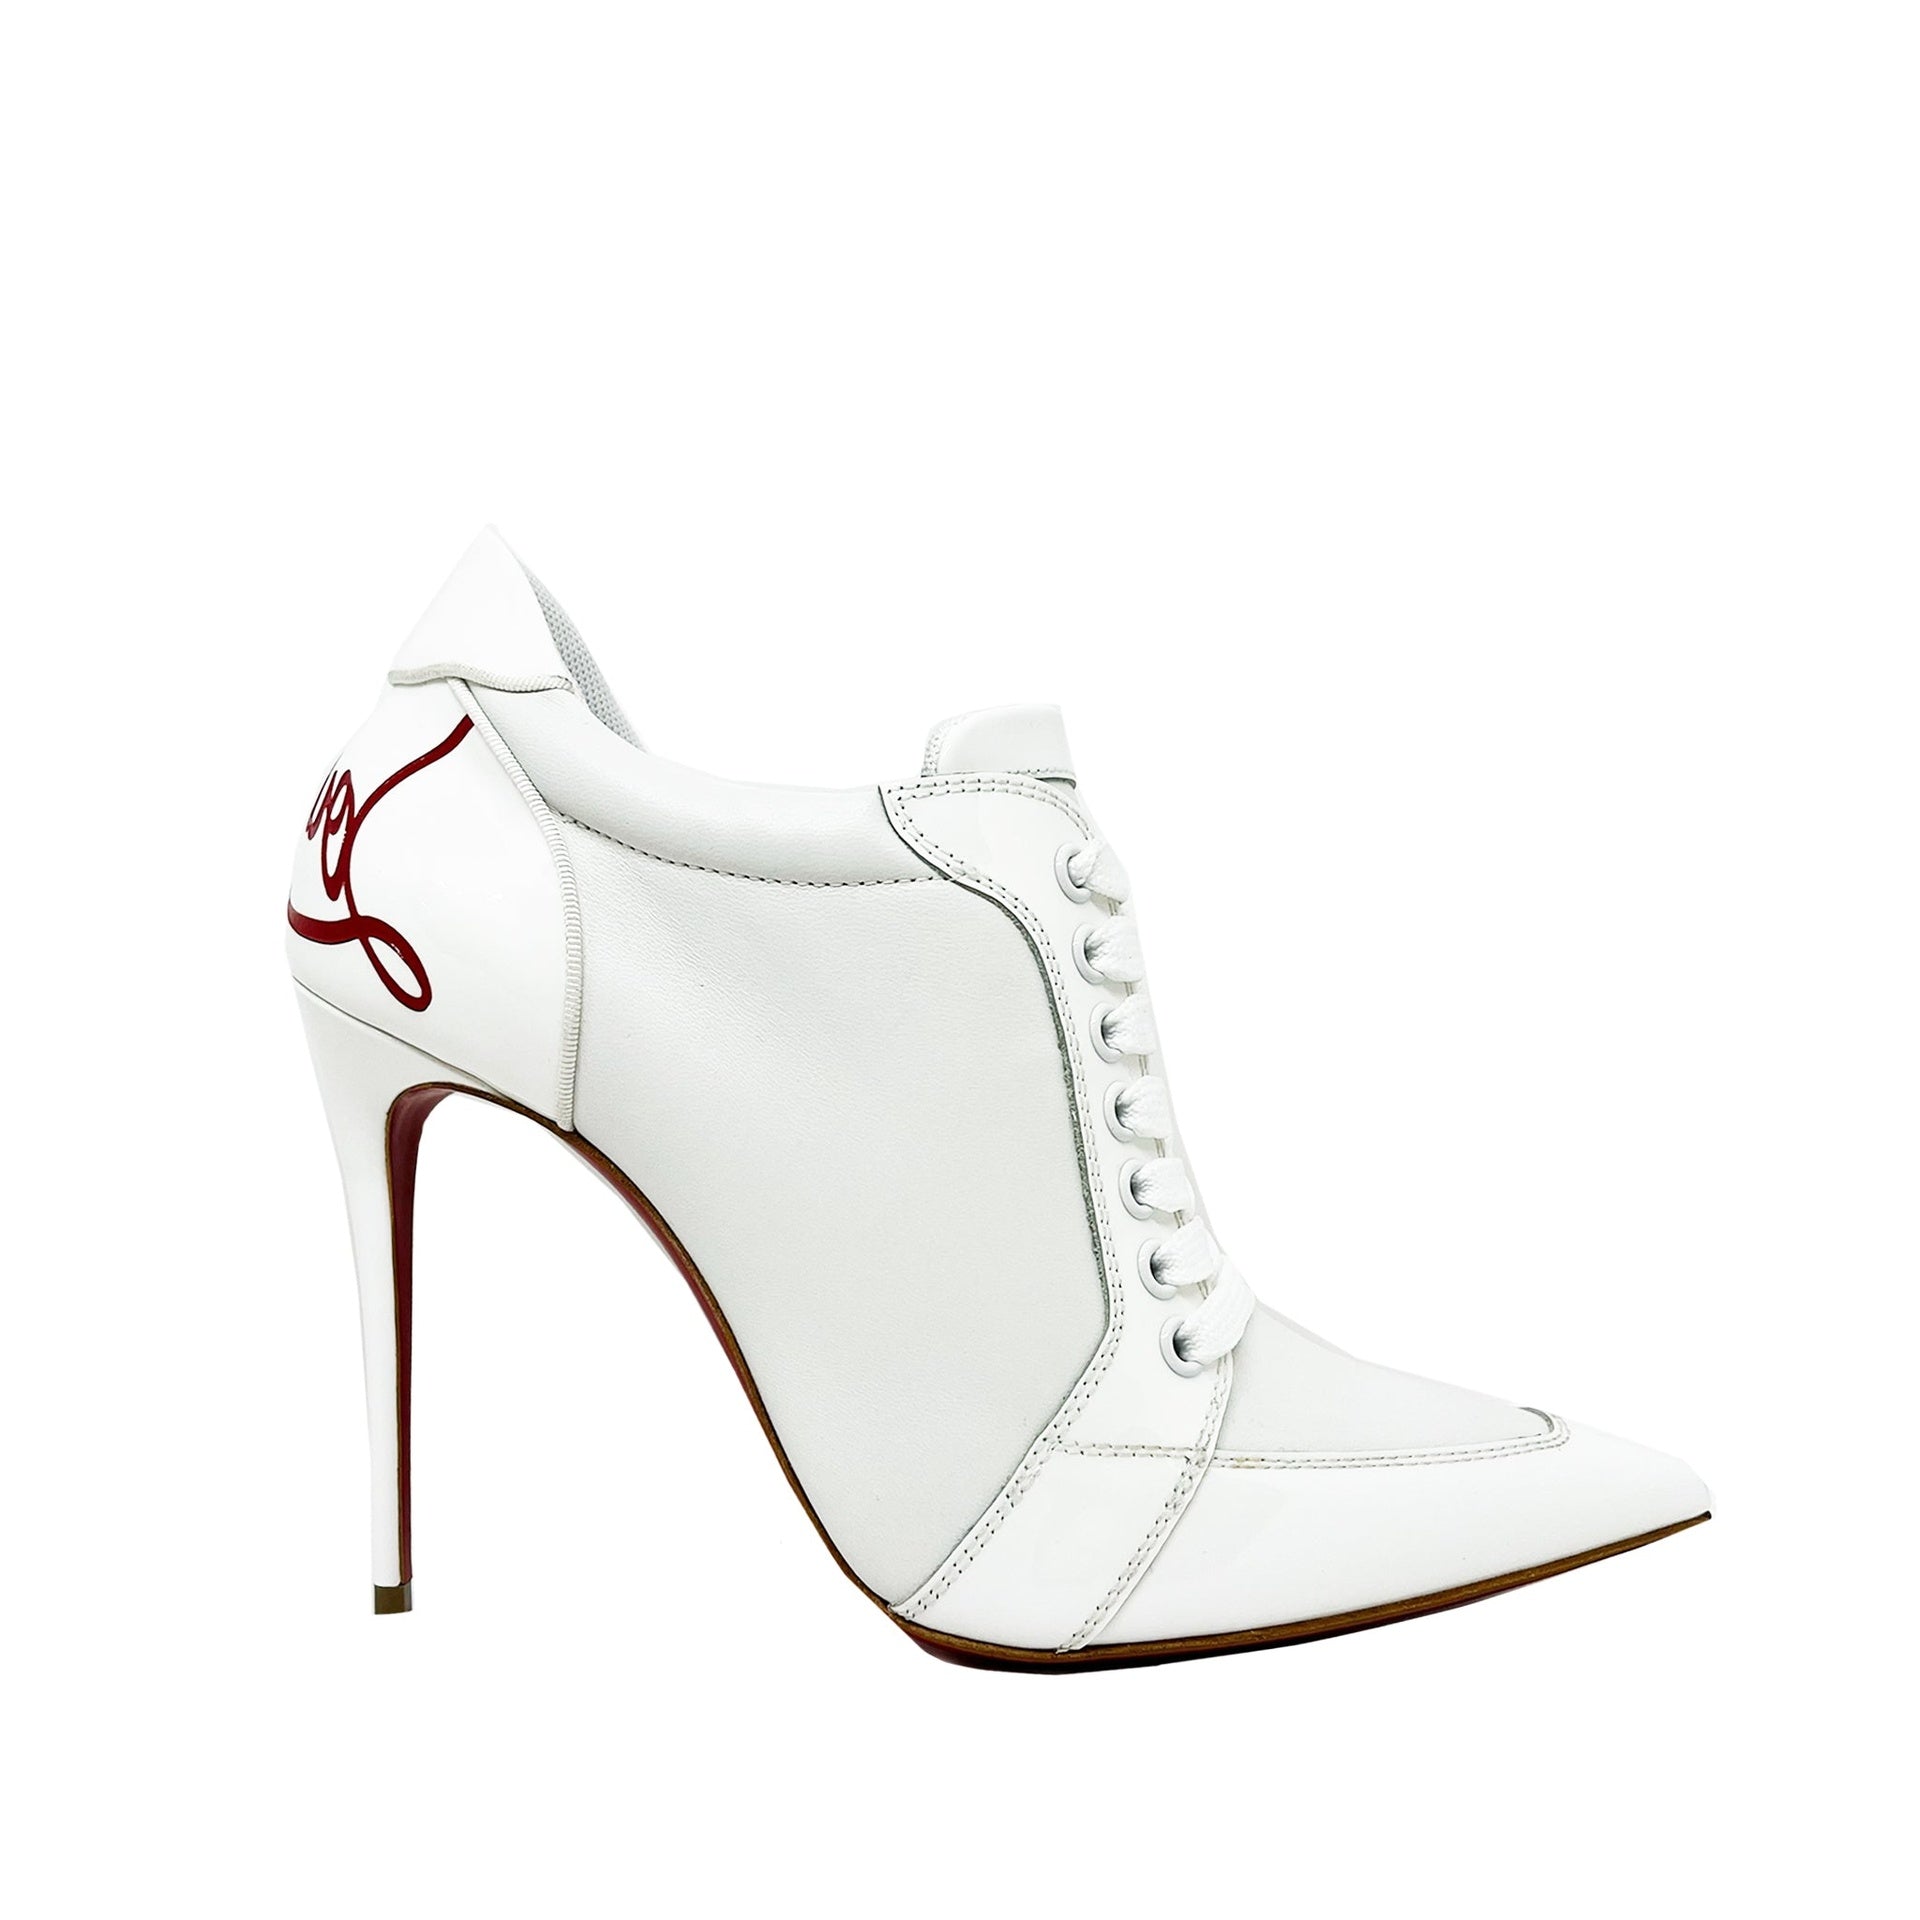 CHRISTIAN-LOUBOUTIN-OUTLET-SALE-Christian-Louboutin-Leather-Pumps-Pumps-WHITE-37-ARCHIVE-COLLECTION.jpg